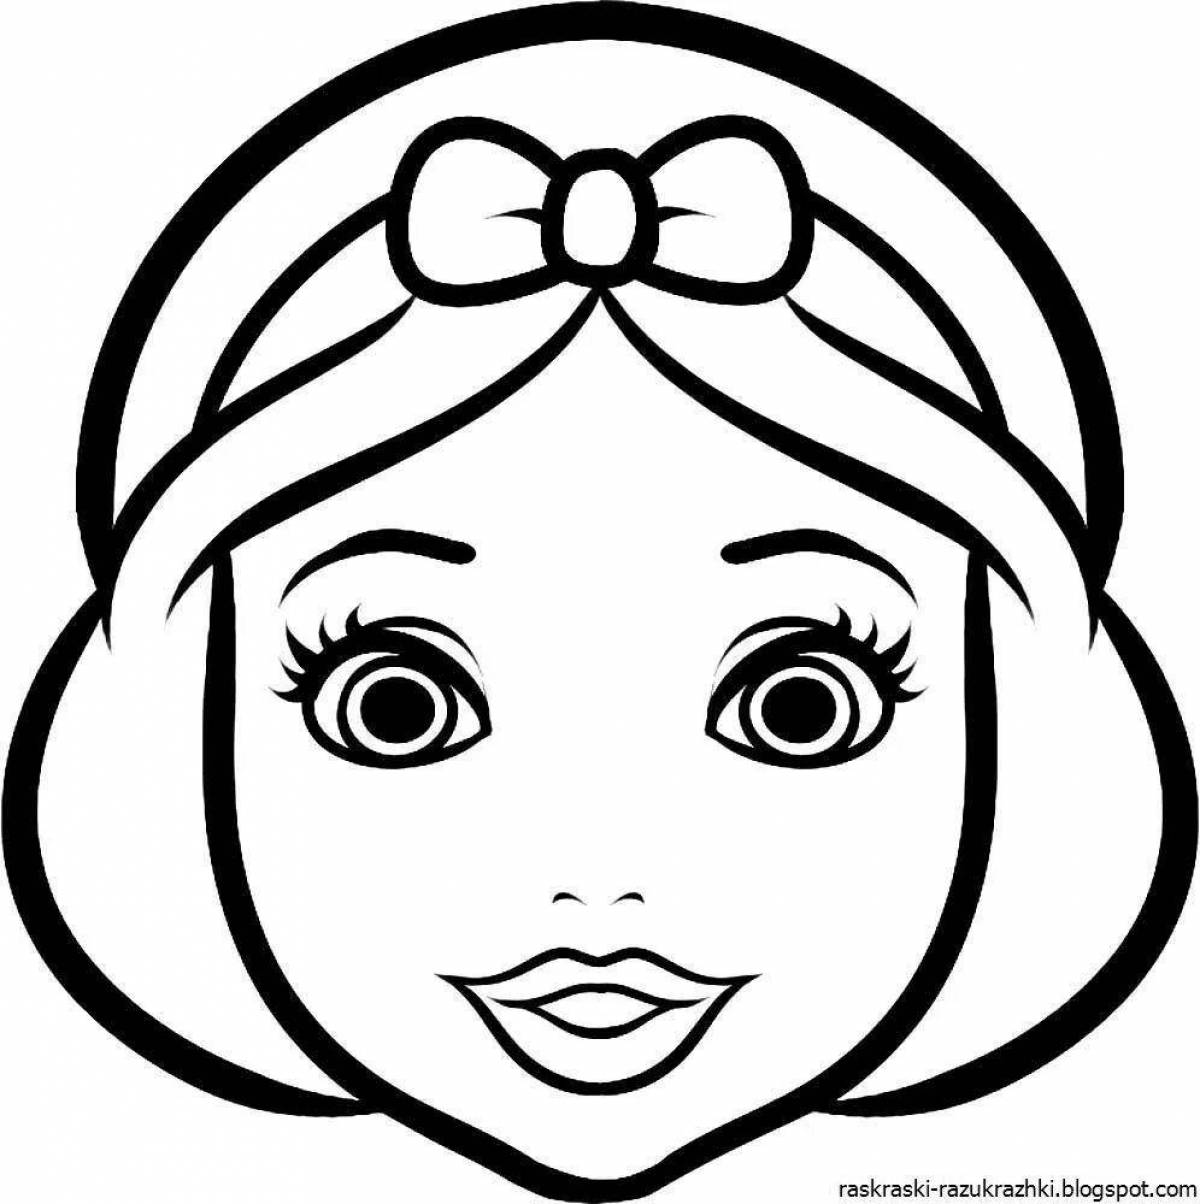 Vibrant human face coloring page for kids